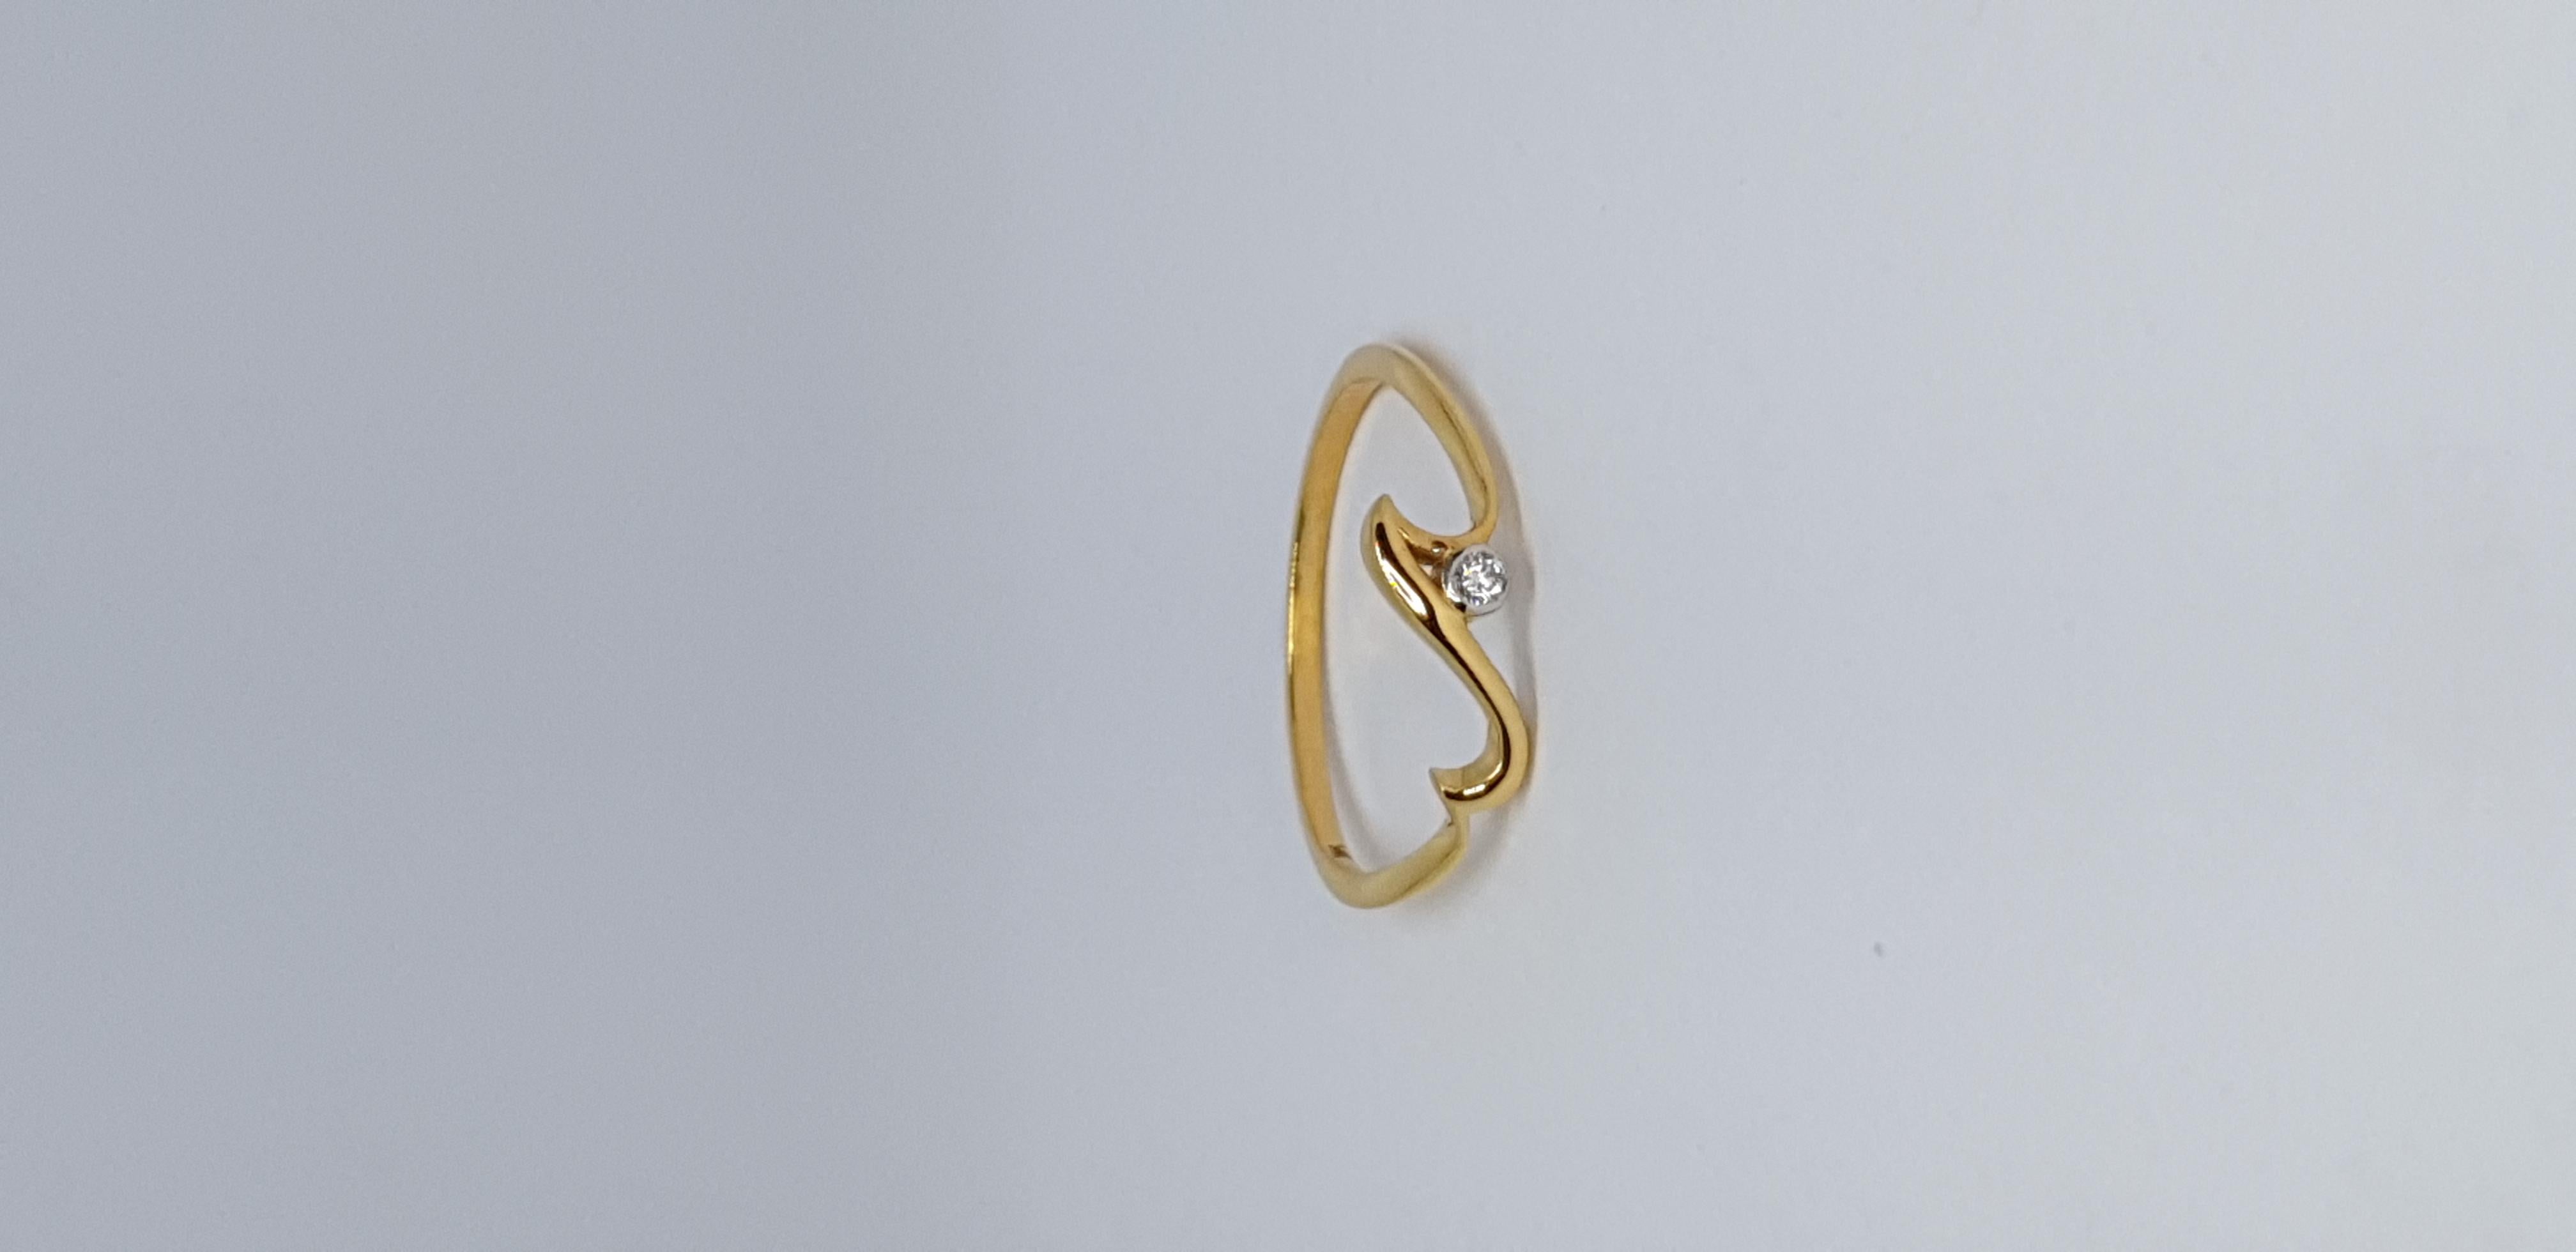 For Sale:  Natural Diamond Wave Ring 14K Solid Gold Dainty Ocean Lover Jewelry Gift. 15